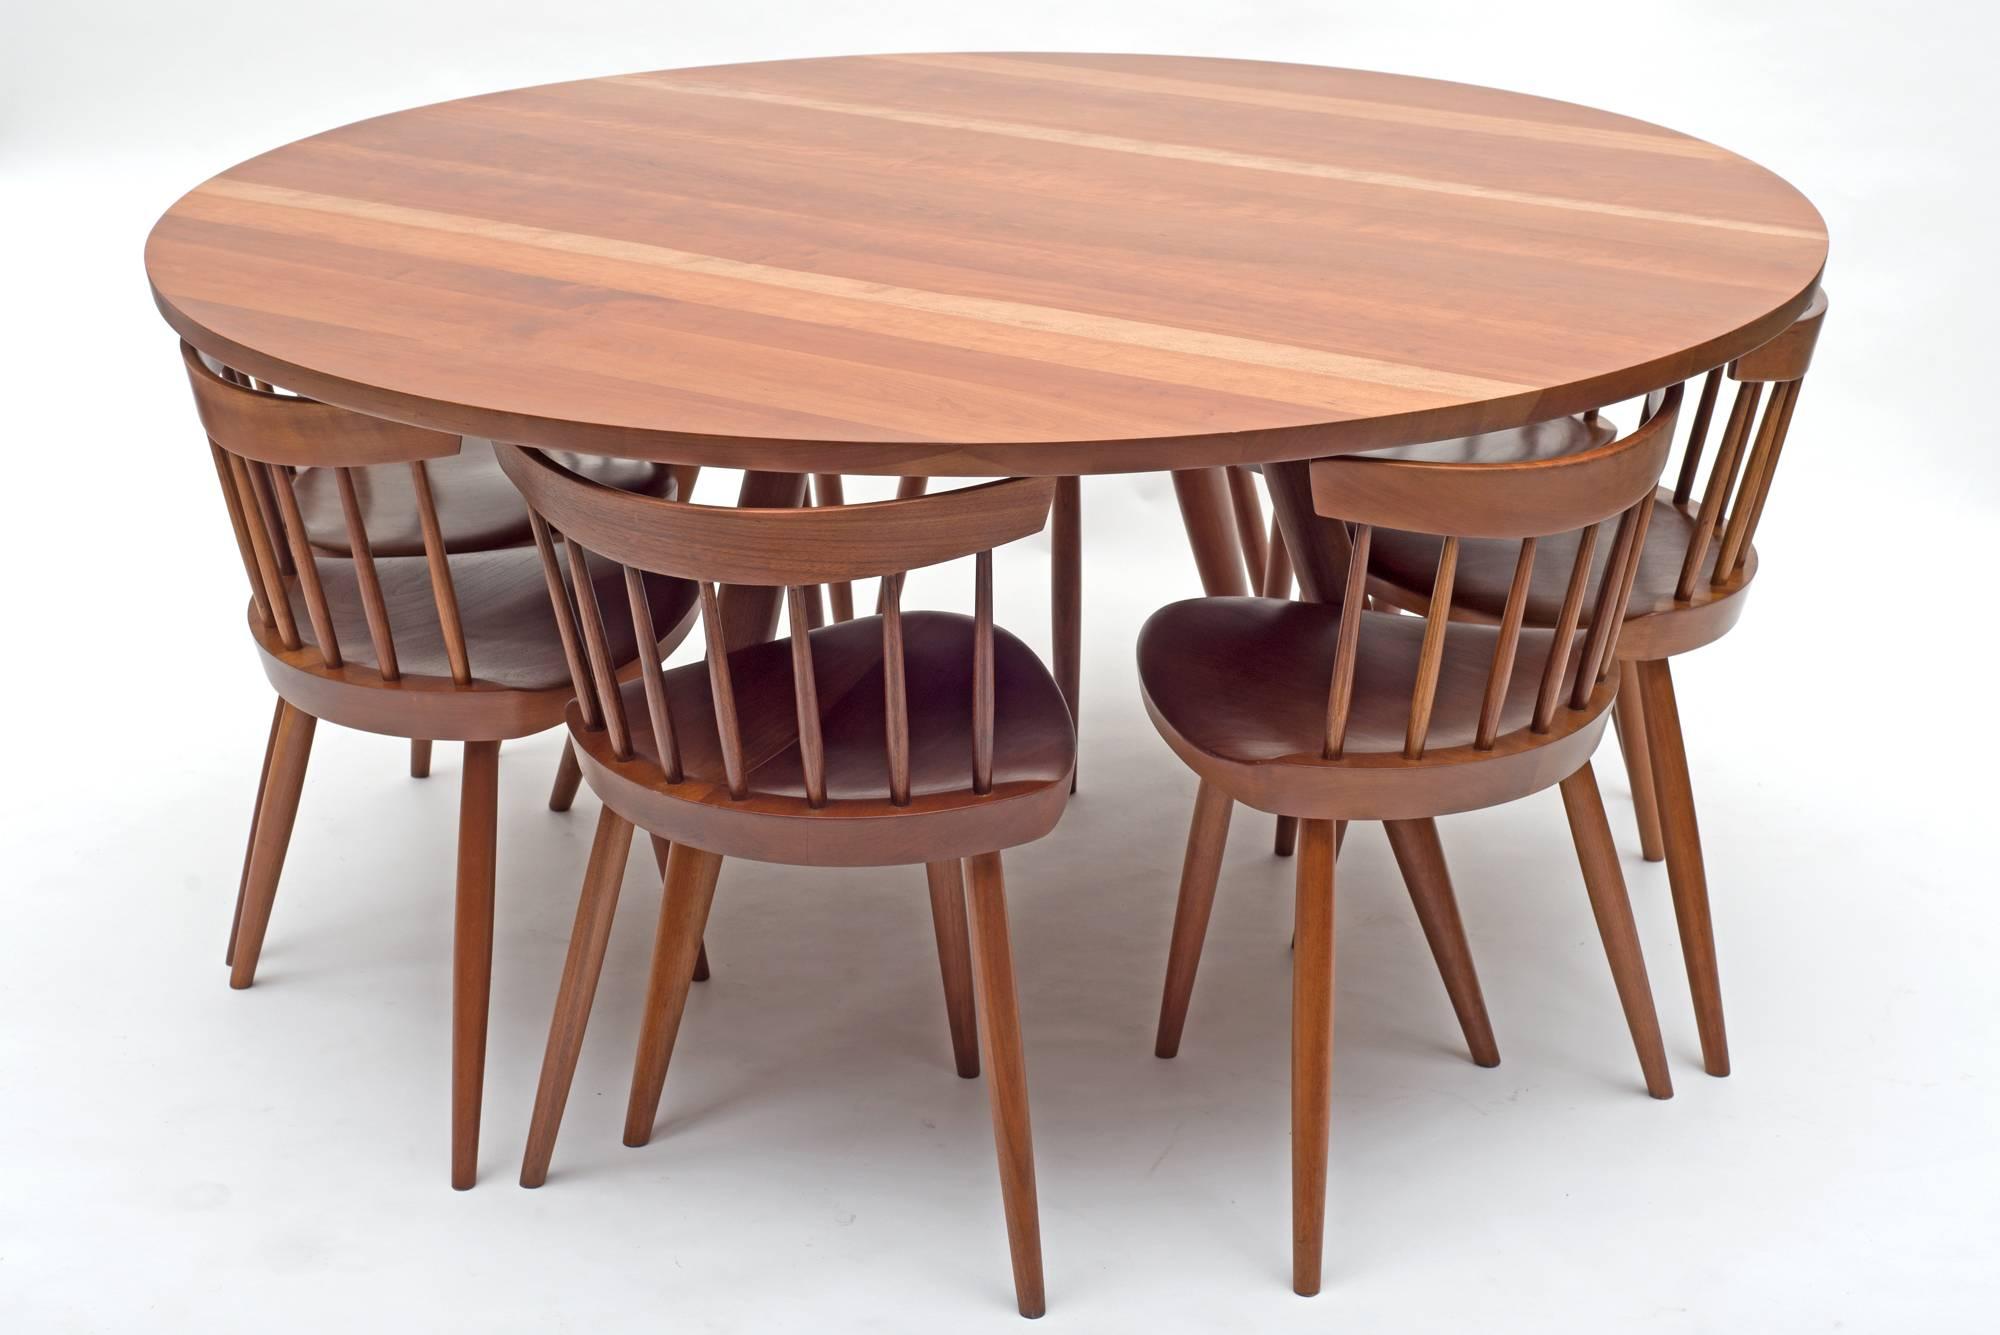 One of George Nakashima's Classic dining table designs with nine Mira chairs eight of which fit under the tabletop. The set is in wonderful restored condition.